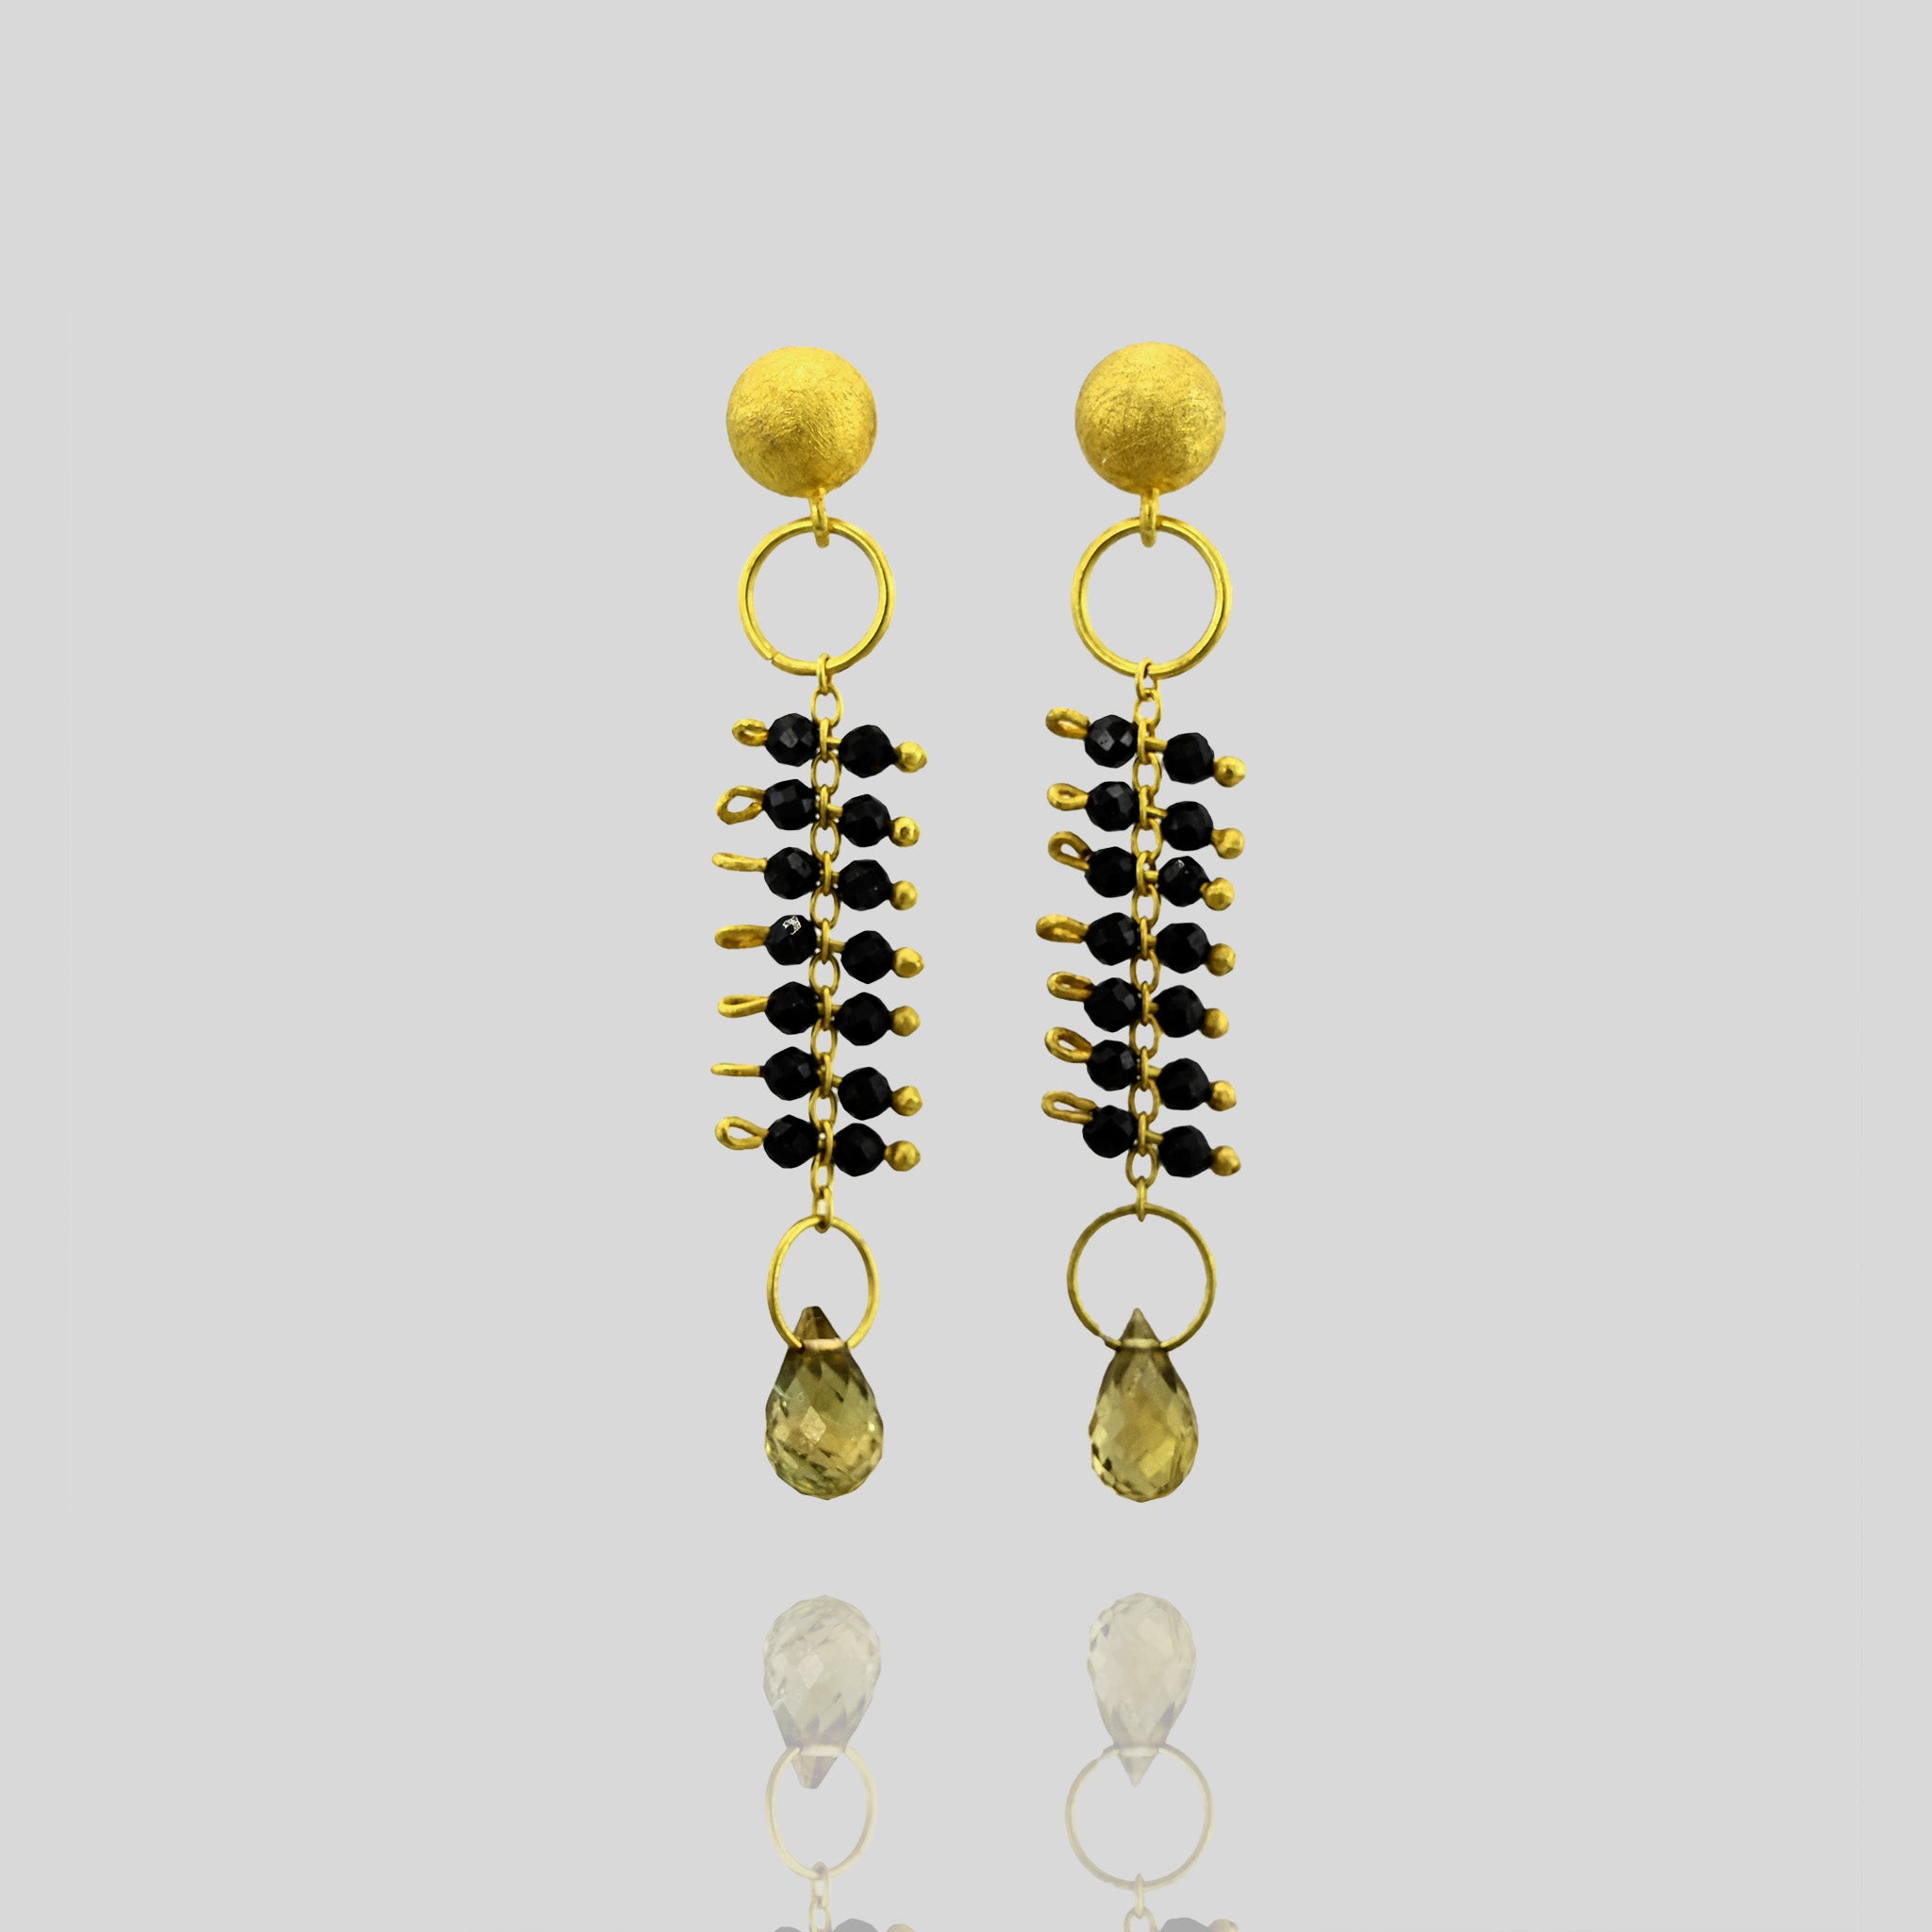 close up of Venus Gold Earrings with Onyx Beads & Drop-Shaped Tourmaline - Inspired by the Sea Goddess, with Delicate Gold Threads.